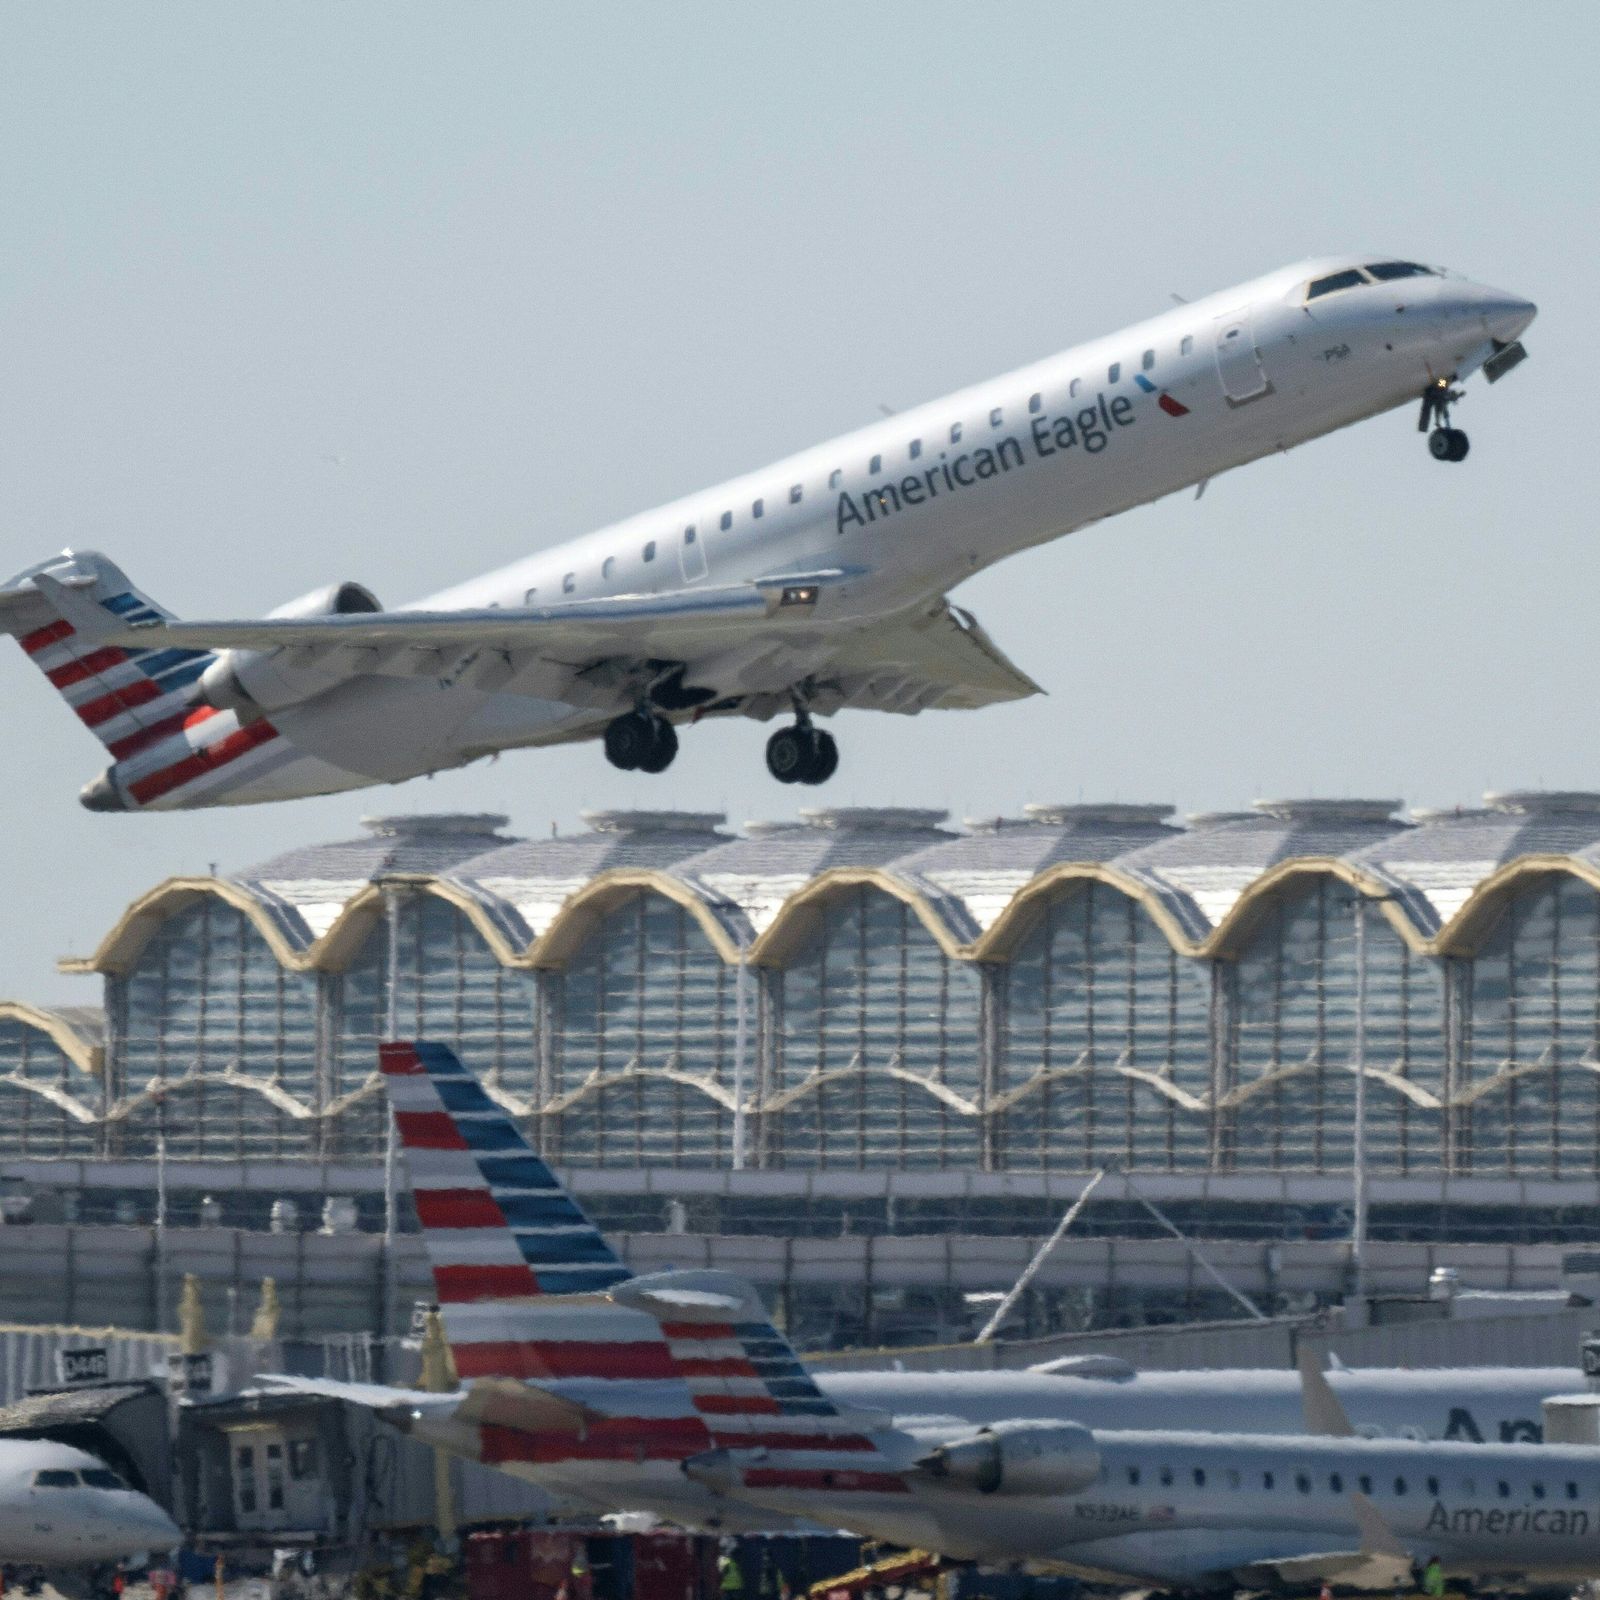 Despite House defeat of proposal to add Reagan National flights